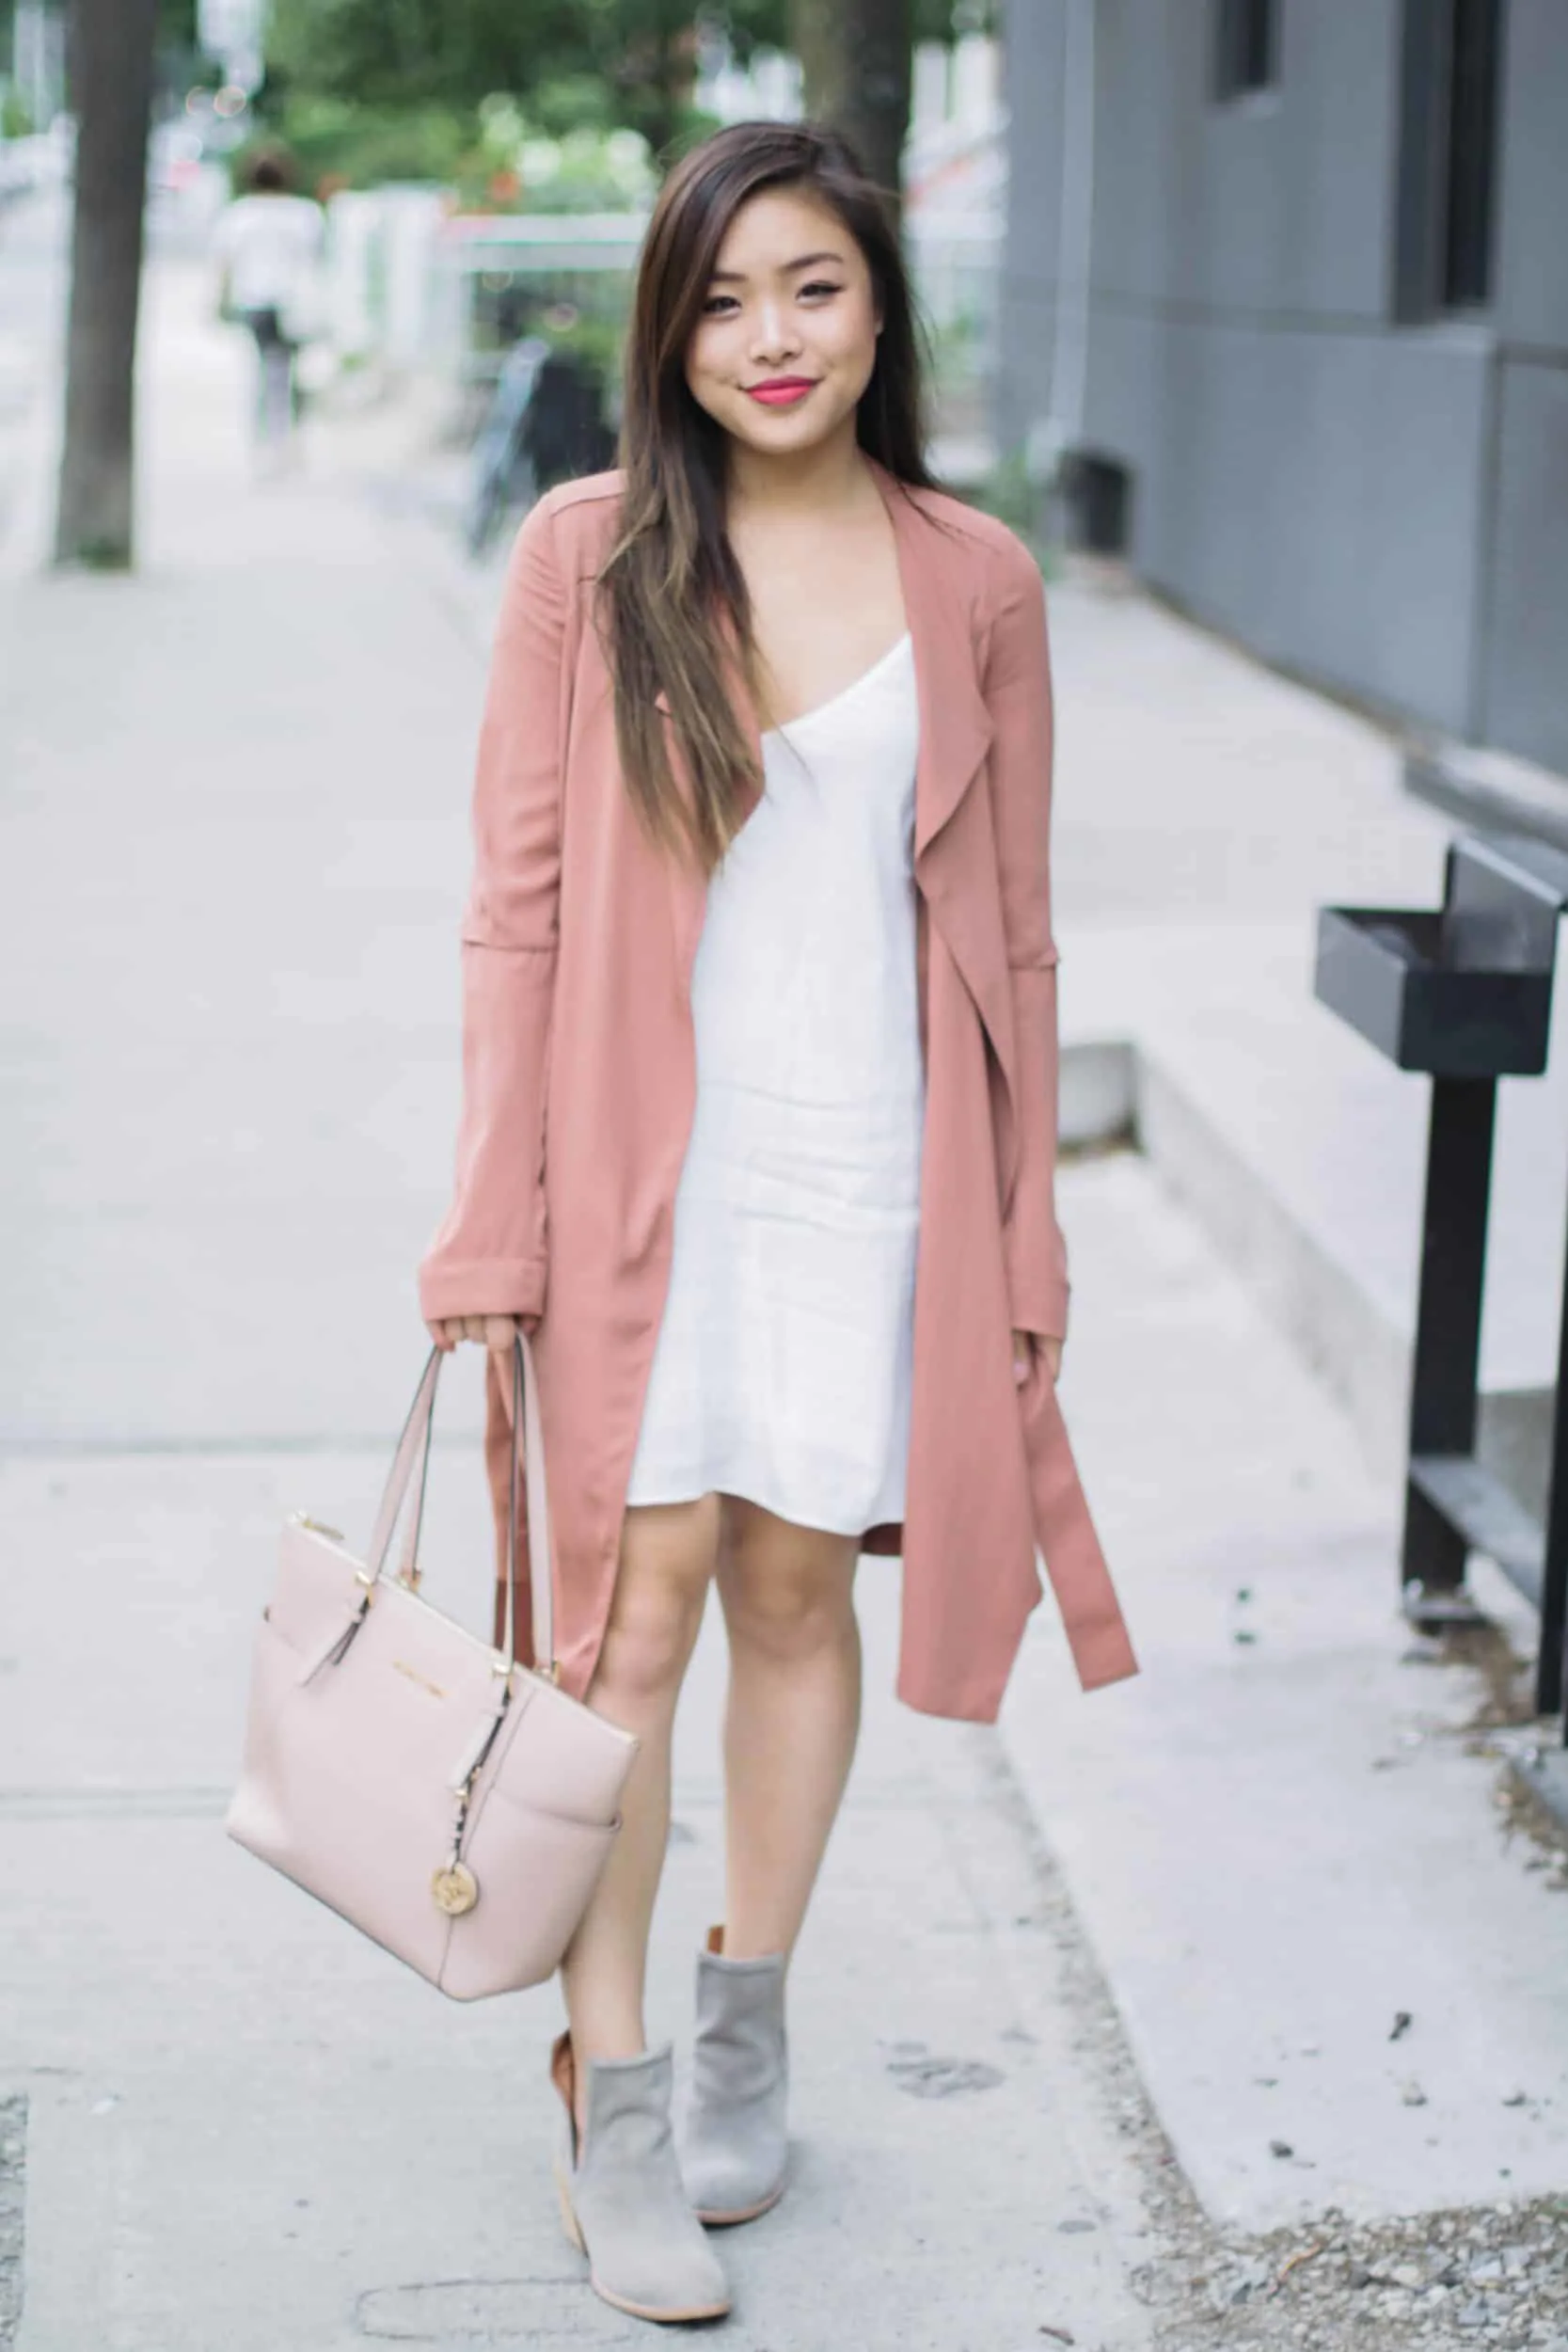 Summer outfit featuring Aritzia white slip dress, pink trench coat, Jeffrey Campbell grey suede booties, and nude Michael Kors bag